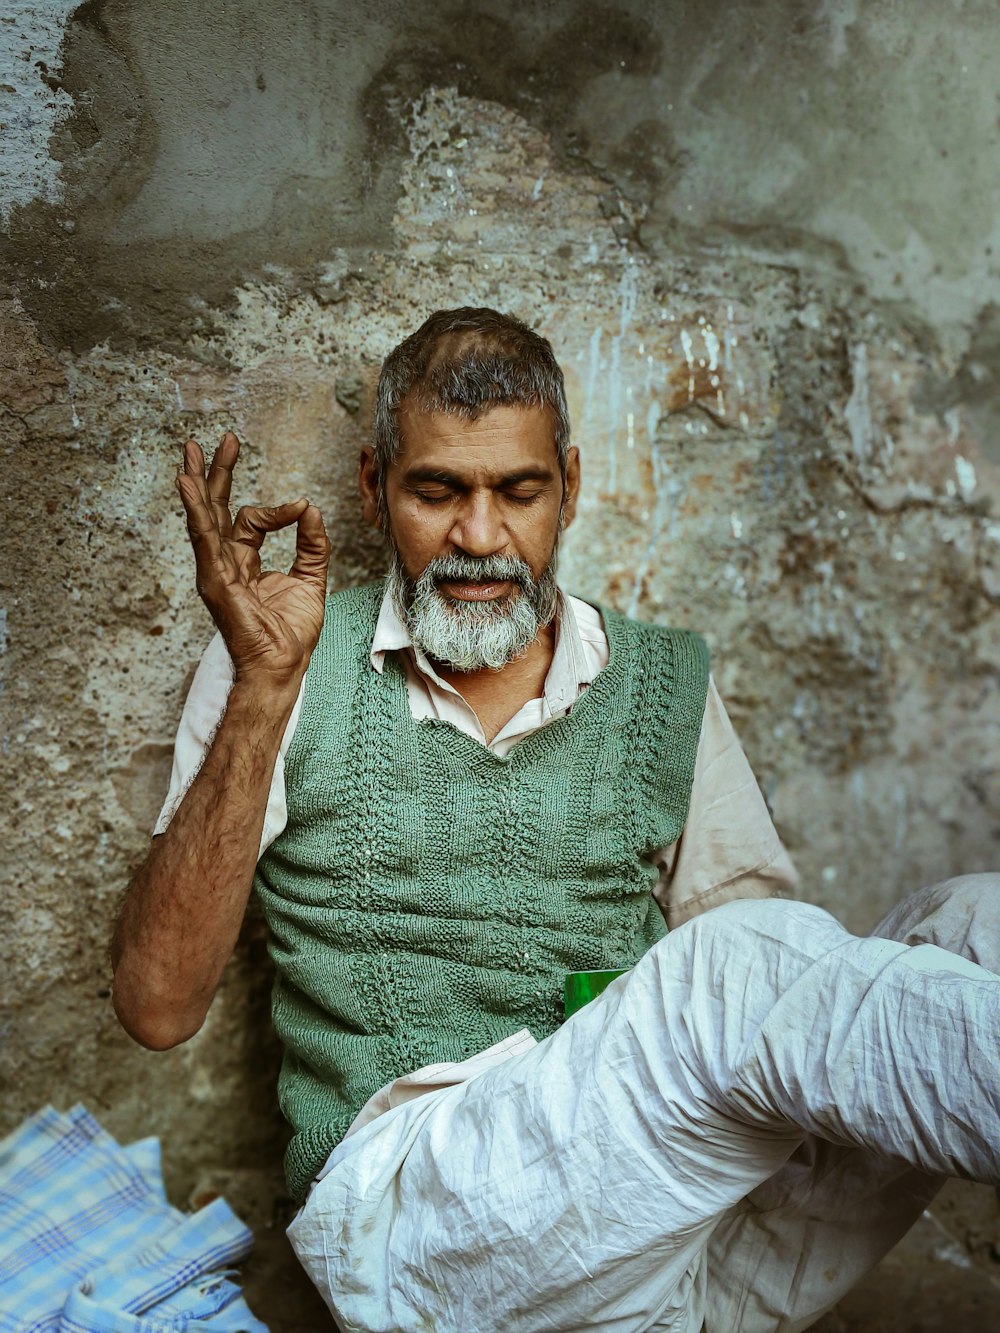 a man sitting on the ground with his hands in the air